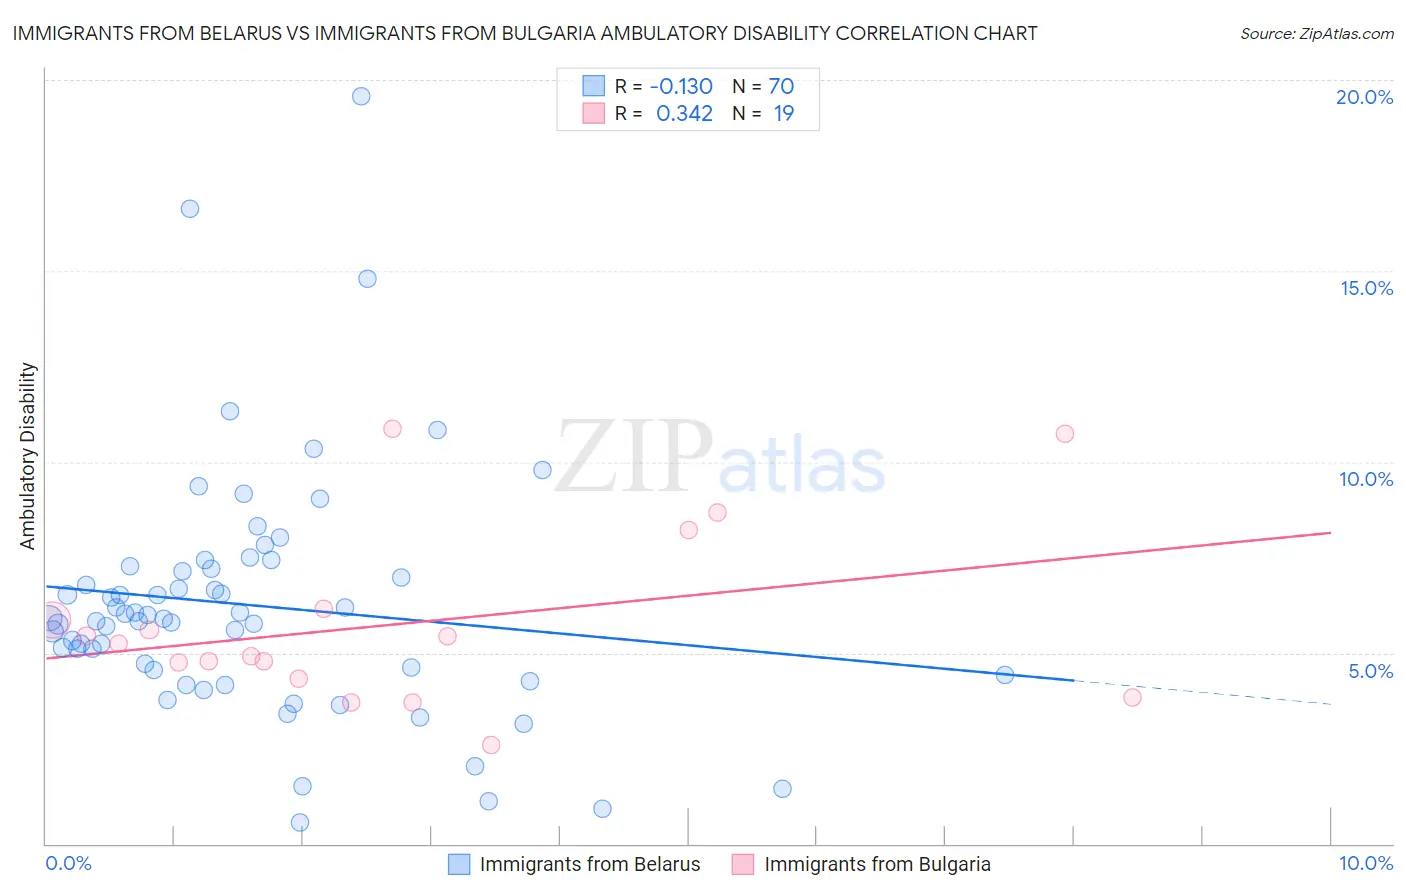 Immigrants from Belarus vs Immigrants from Bulgaria Ambulatory Disability